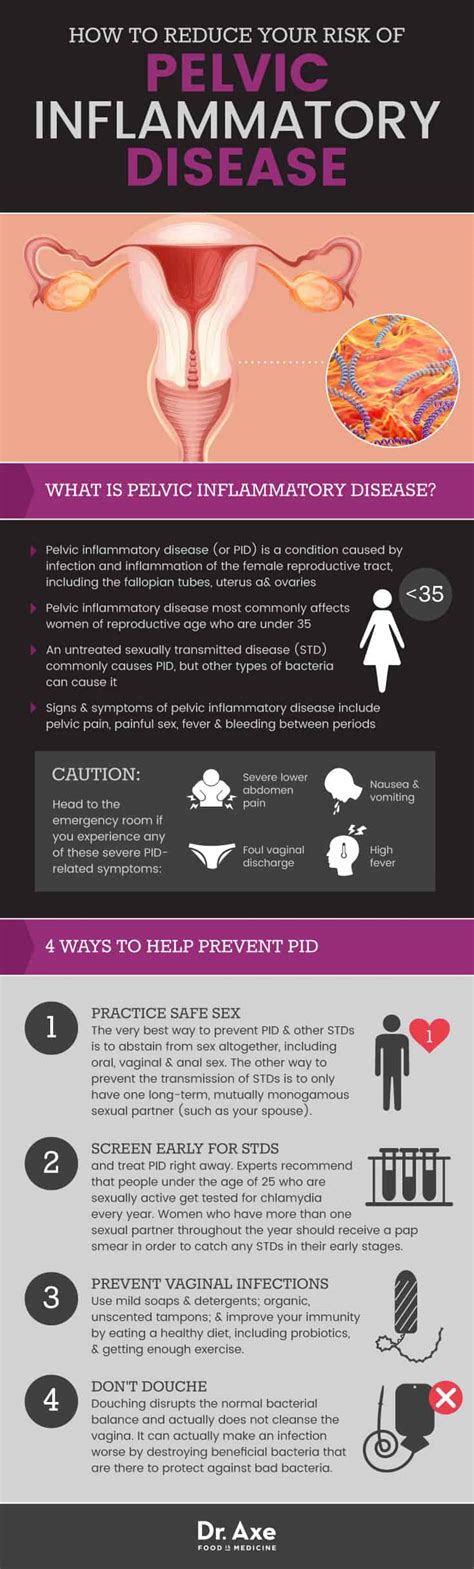 Pelvic Inflammatory Disease Prevention And Symptom Relief Dr Axe